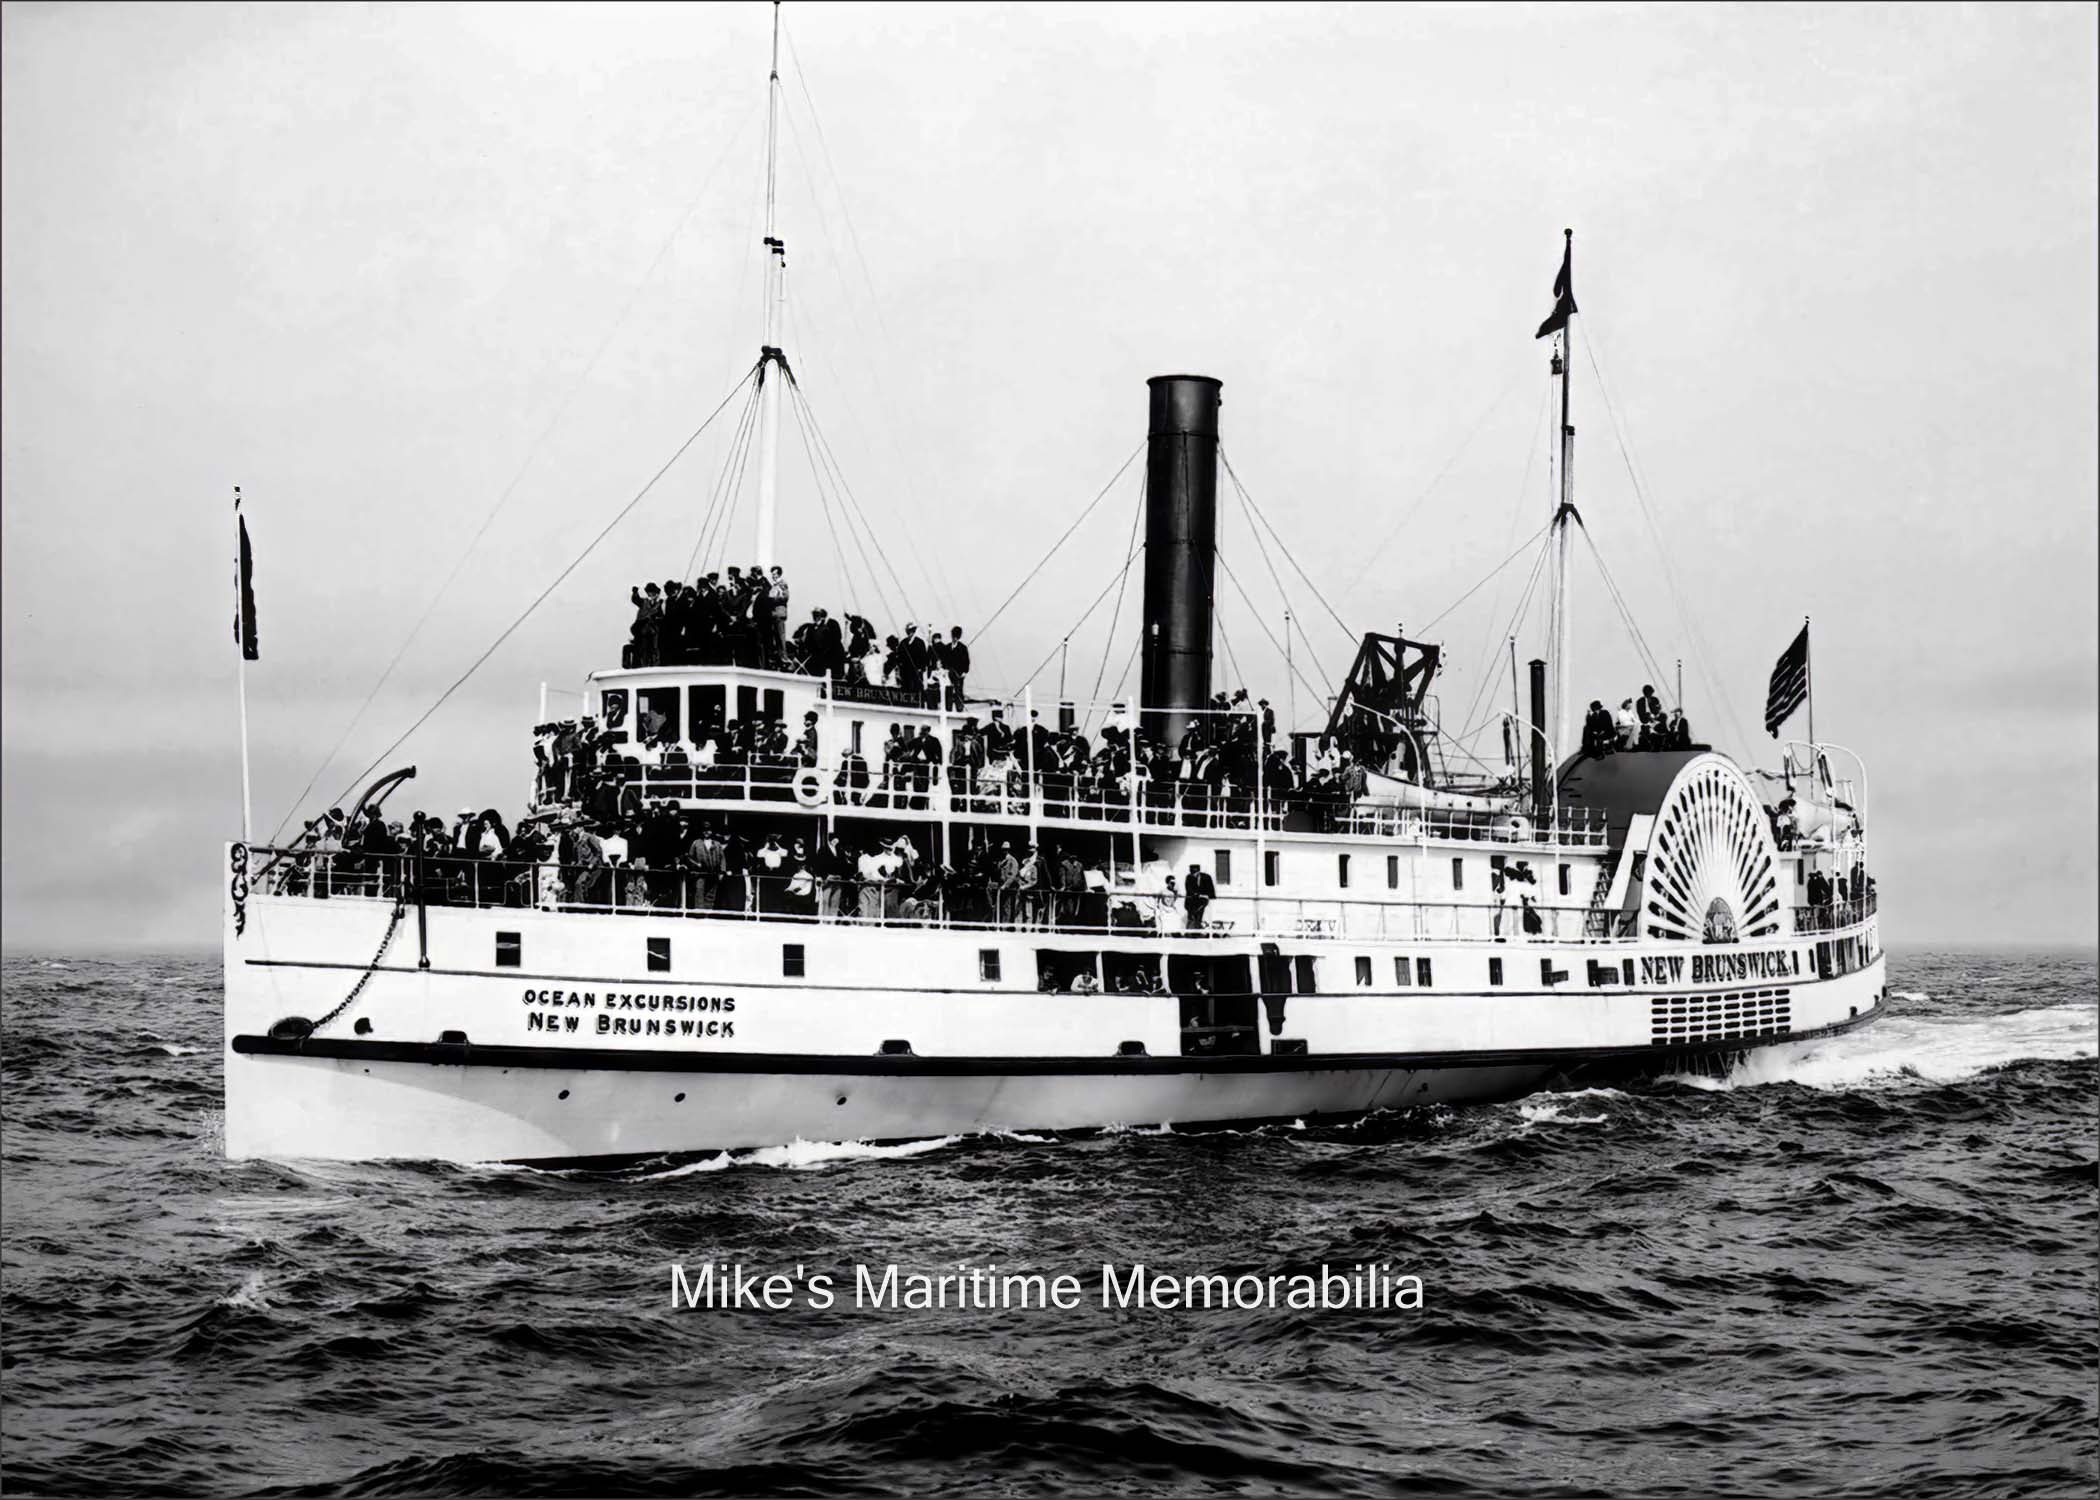 NEW BRUNSWICK, New York, NY – 1900 In 1900, the steamer "NEW BRUNSWICK" sailed to the "Fishing Banks" every day during the summer season. This triple decked steamboat departed from piers along New York's East River under the command of Captain James Lynch. Unlike the fishing steamboats "ANGLER", "EDMUND BUTLER" and "ST. MICHAELS" whose fares were 75 cents for Gents and 50 cents for Ladies, the "NEW BRUNSWICK" was a bargain and advertised all fares at 50 cents and children accompanied by an adult were free.